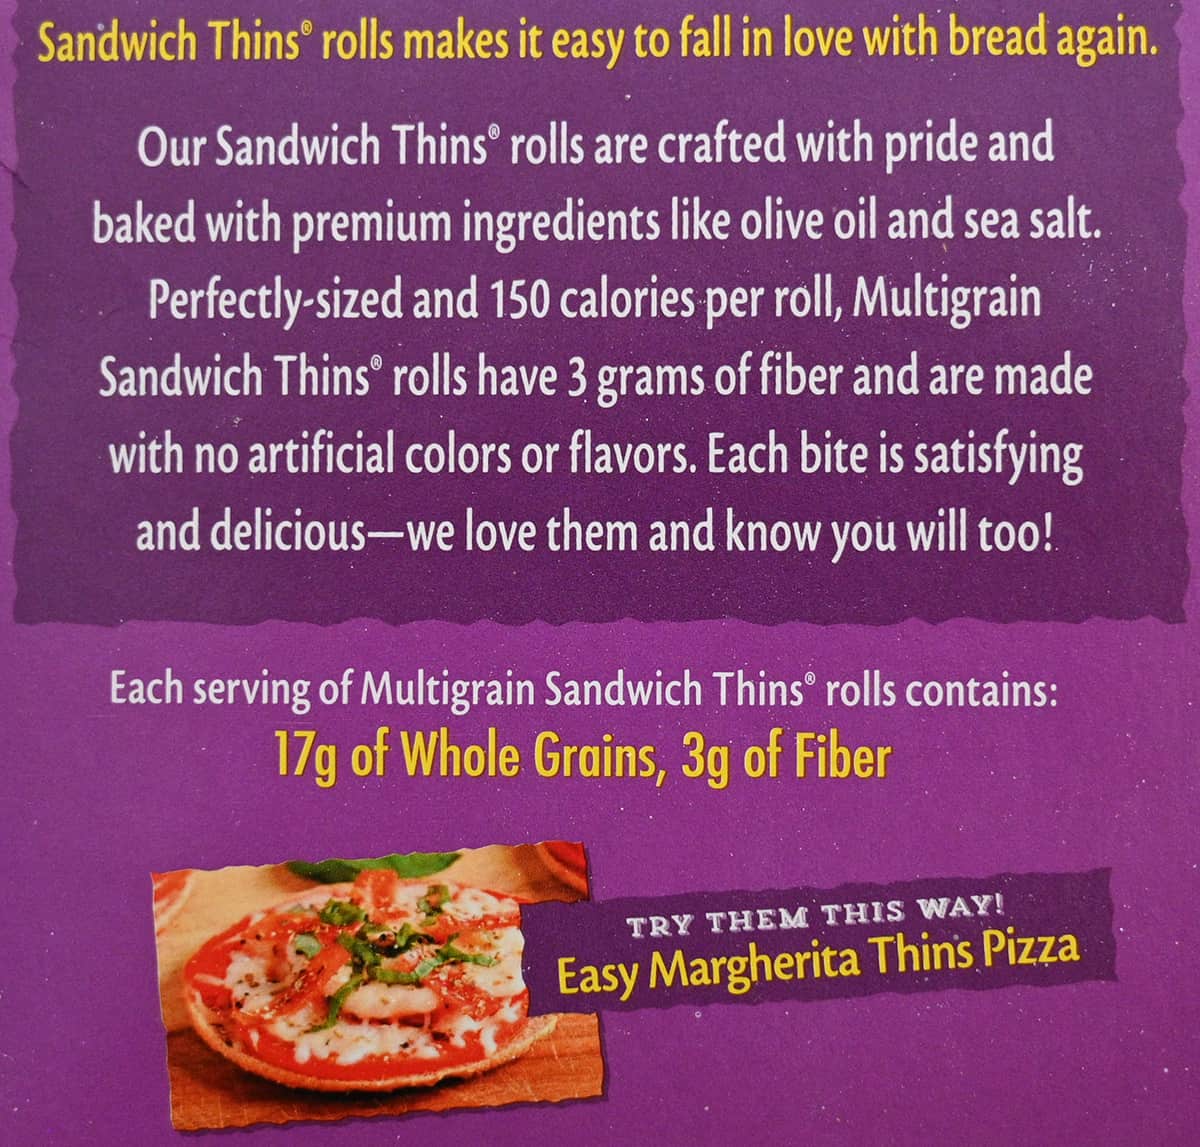 Image of the sandwich thins product description from the back of the box.